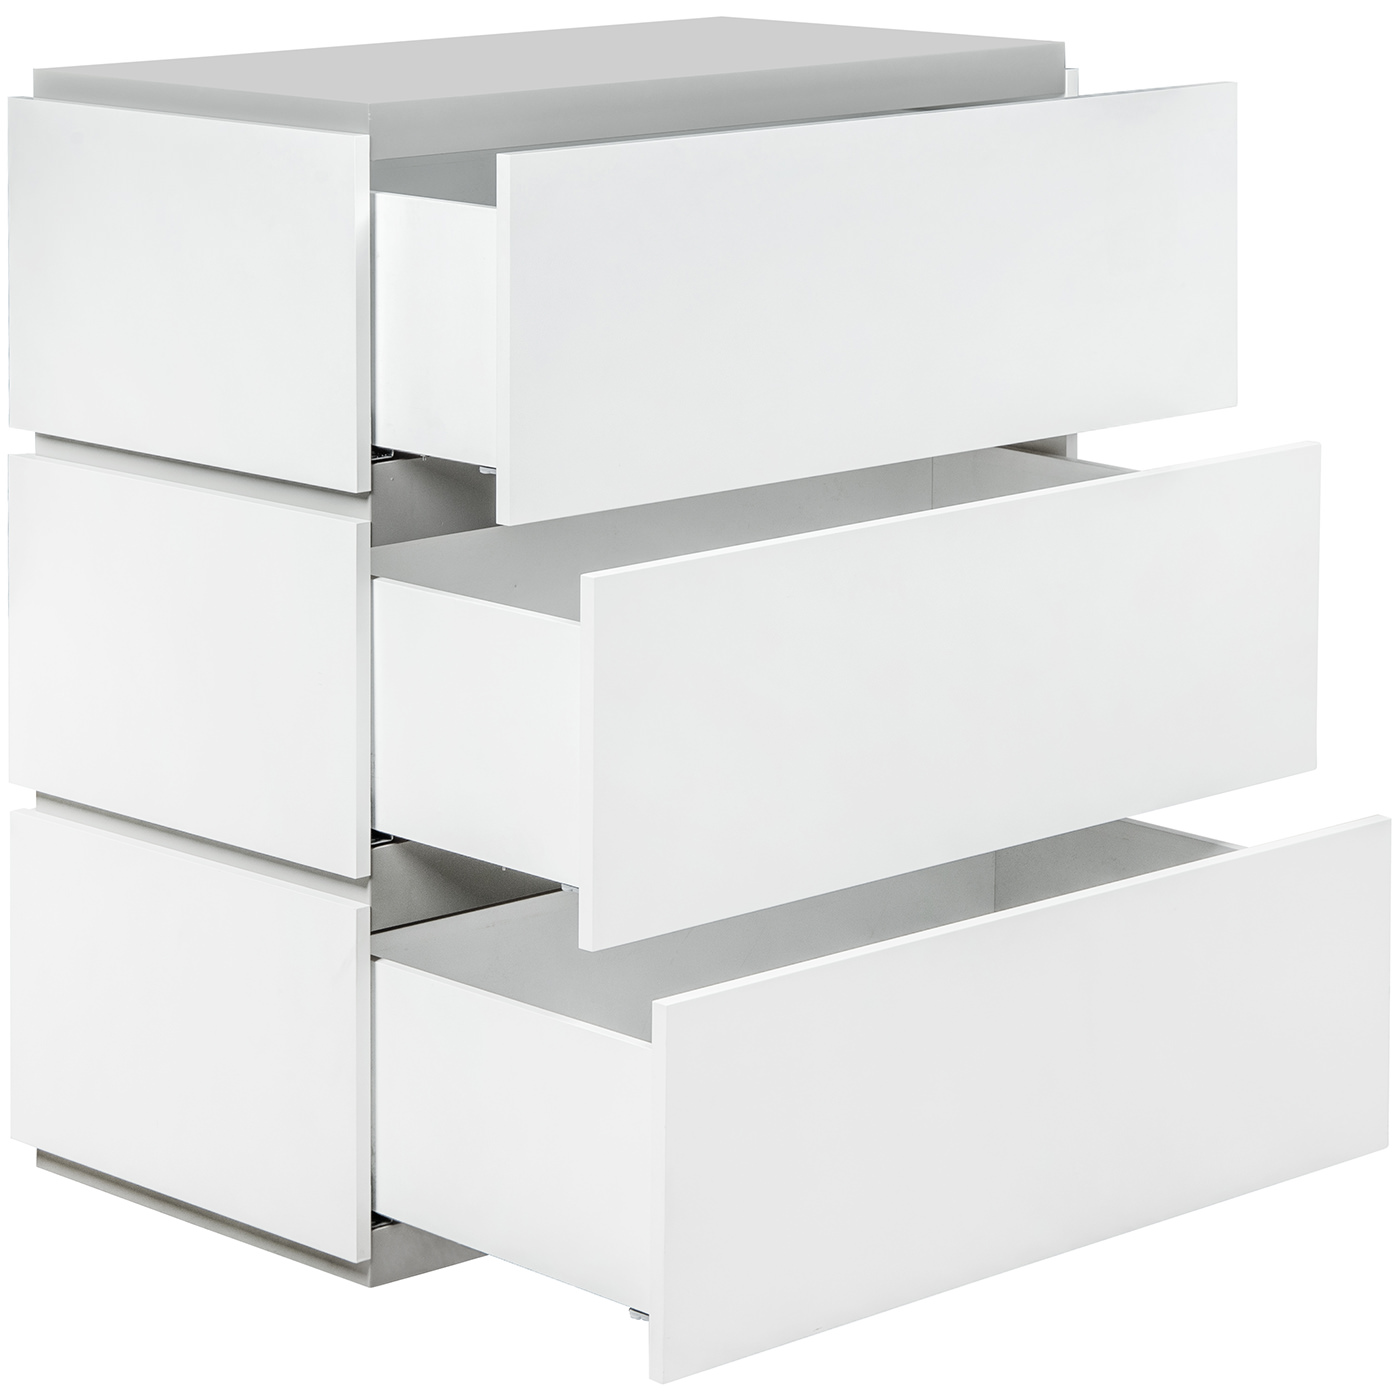 KS 5151 103 3 – Slot Chest Of 3 Drawers Comp. 010 Pure White Grey (3)